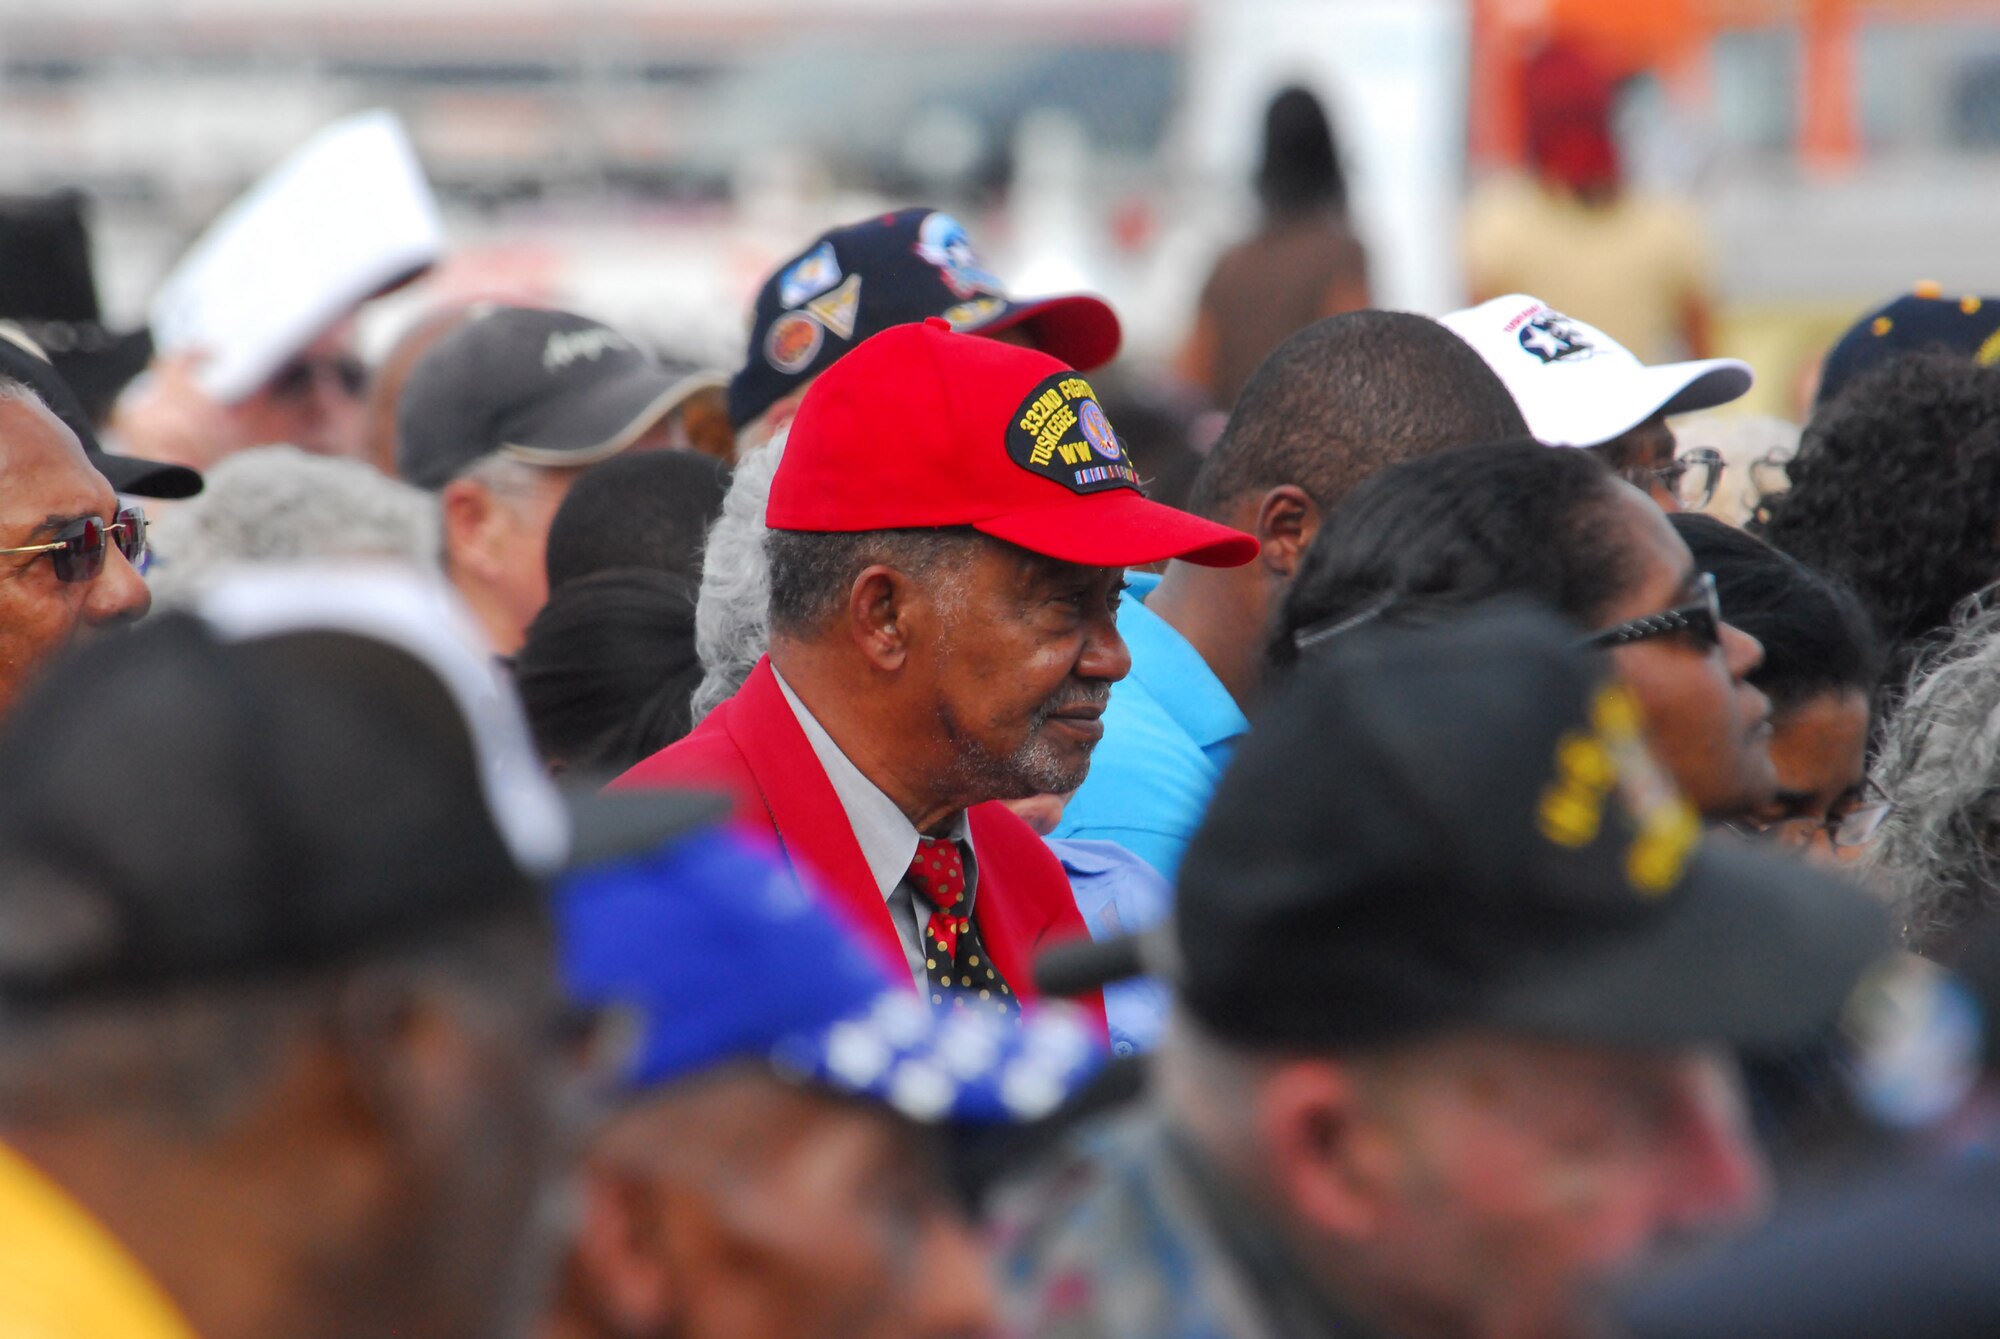 One of the Documented Original Tuskegee Airmen, or DOTAs, wears the distinctive red hat and jacket at the opening ceremony of the Tuskegee Airmen National Historic Site Oct. 10 at Moton Field, Ala. One estimate notes the Airmen, now in their late 70s and early 80s, are dying at a rate of five per week. (Air Force photo by Scott Knuteson)